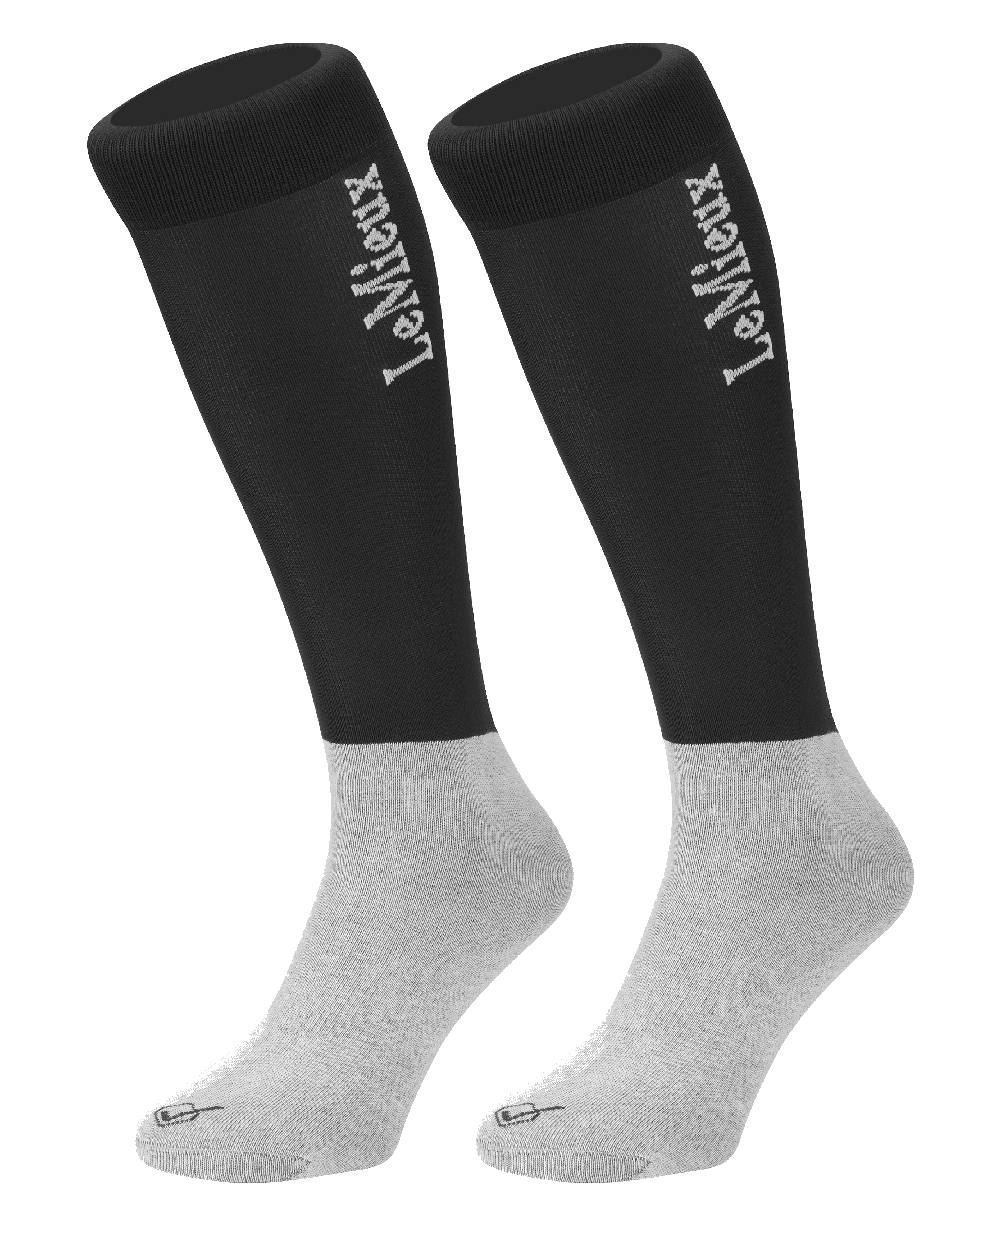 Black coloured LeMieux Competition Socks (Twin Pack) on white background 